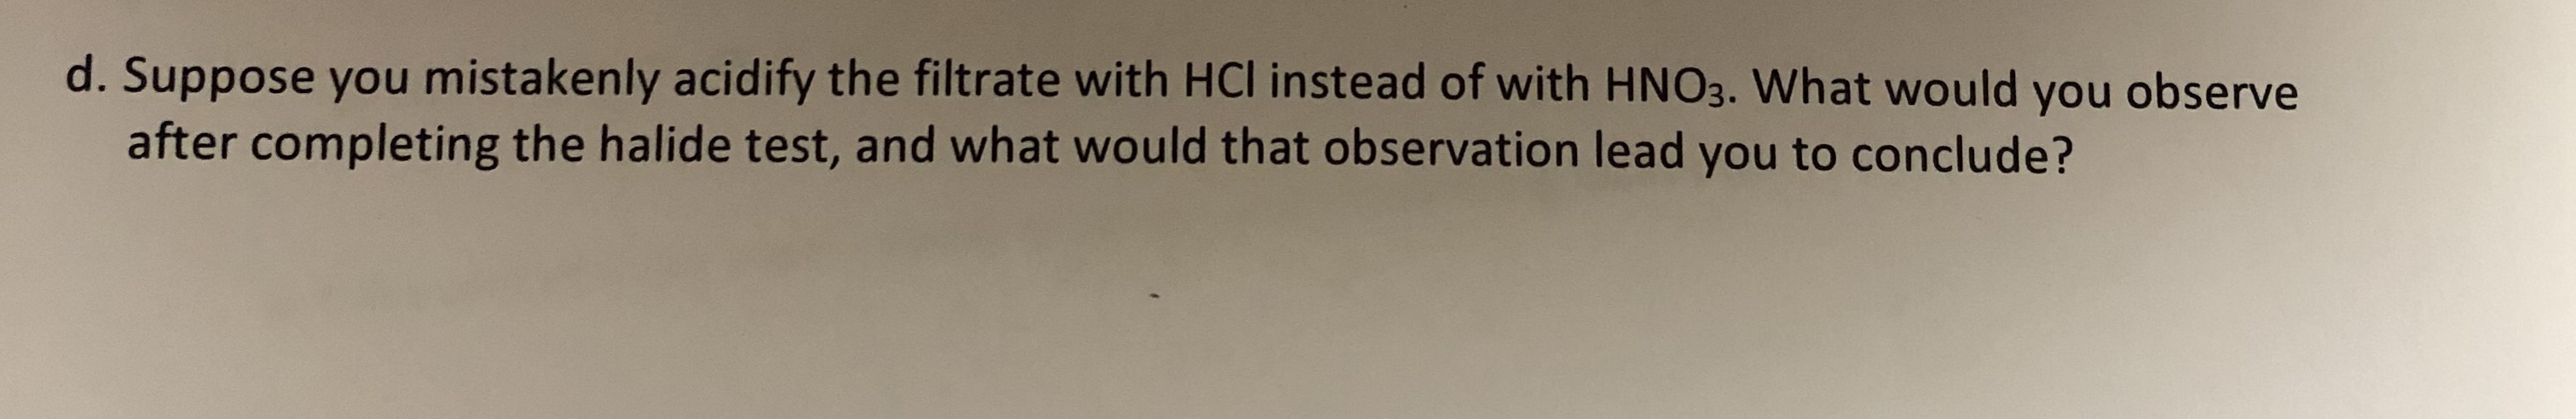 d. Suppose you mistakenly acidify the filtrate with HCI instead of with HN03. What would you observe
after completing the halide test, and what would that observation lead you to conclude?
